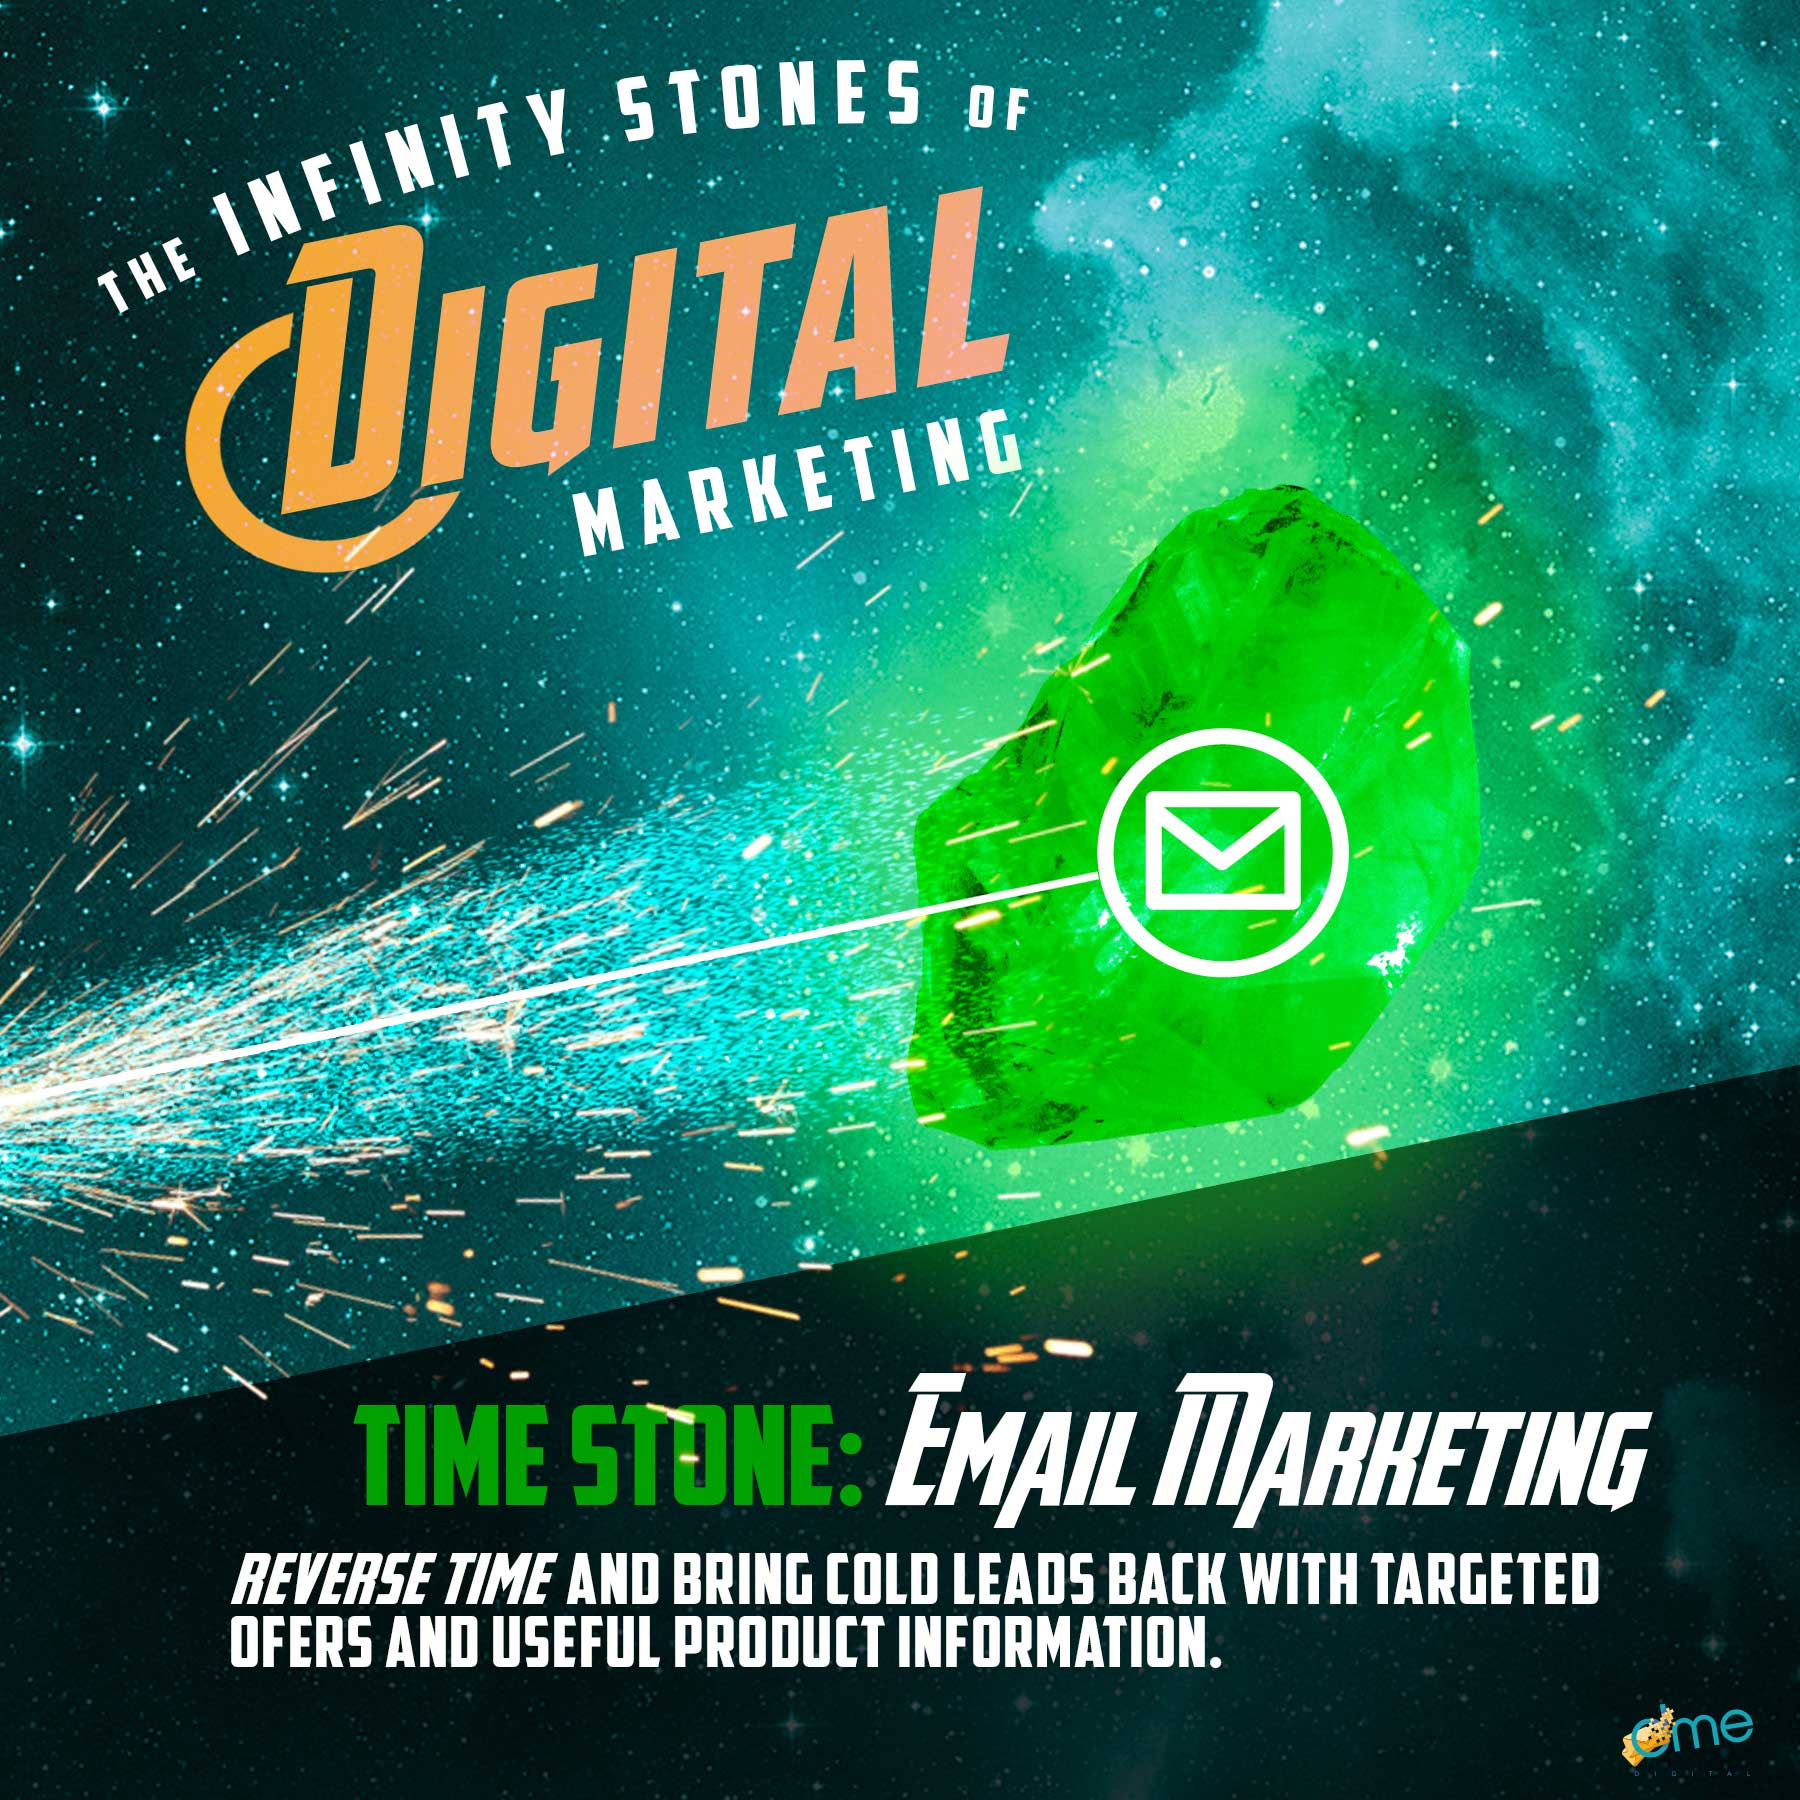 The time stone of digital marketing is email marketing.